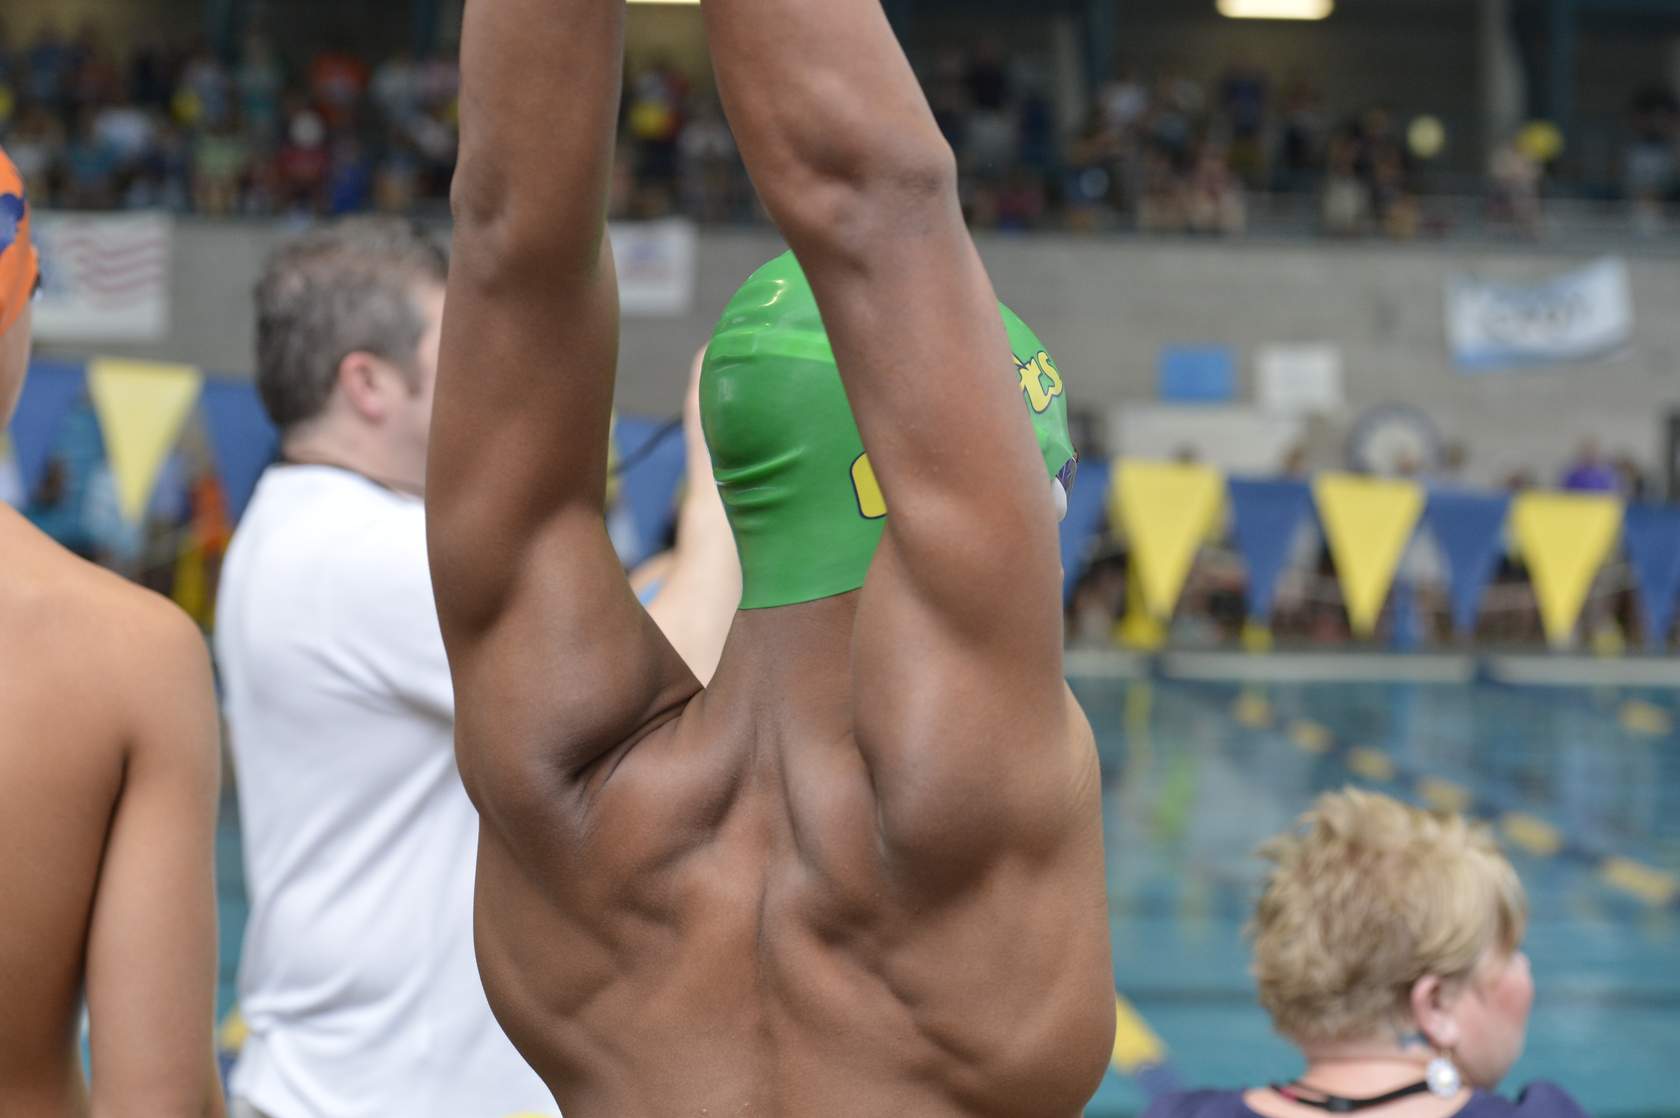 Swimmer stretching, back muscles